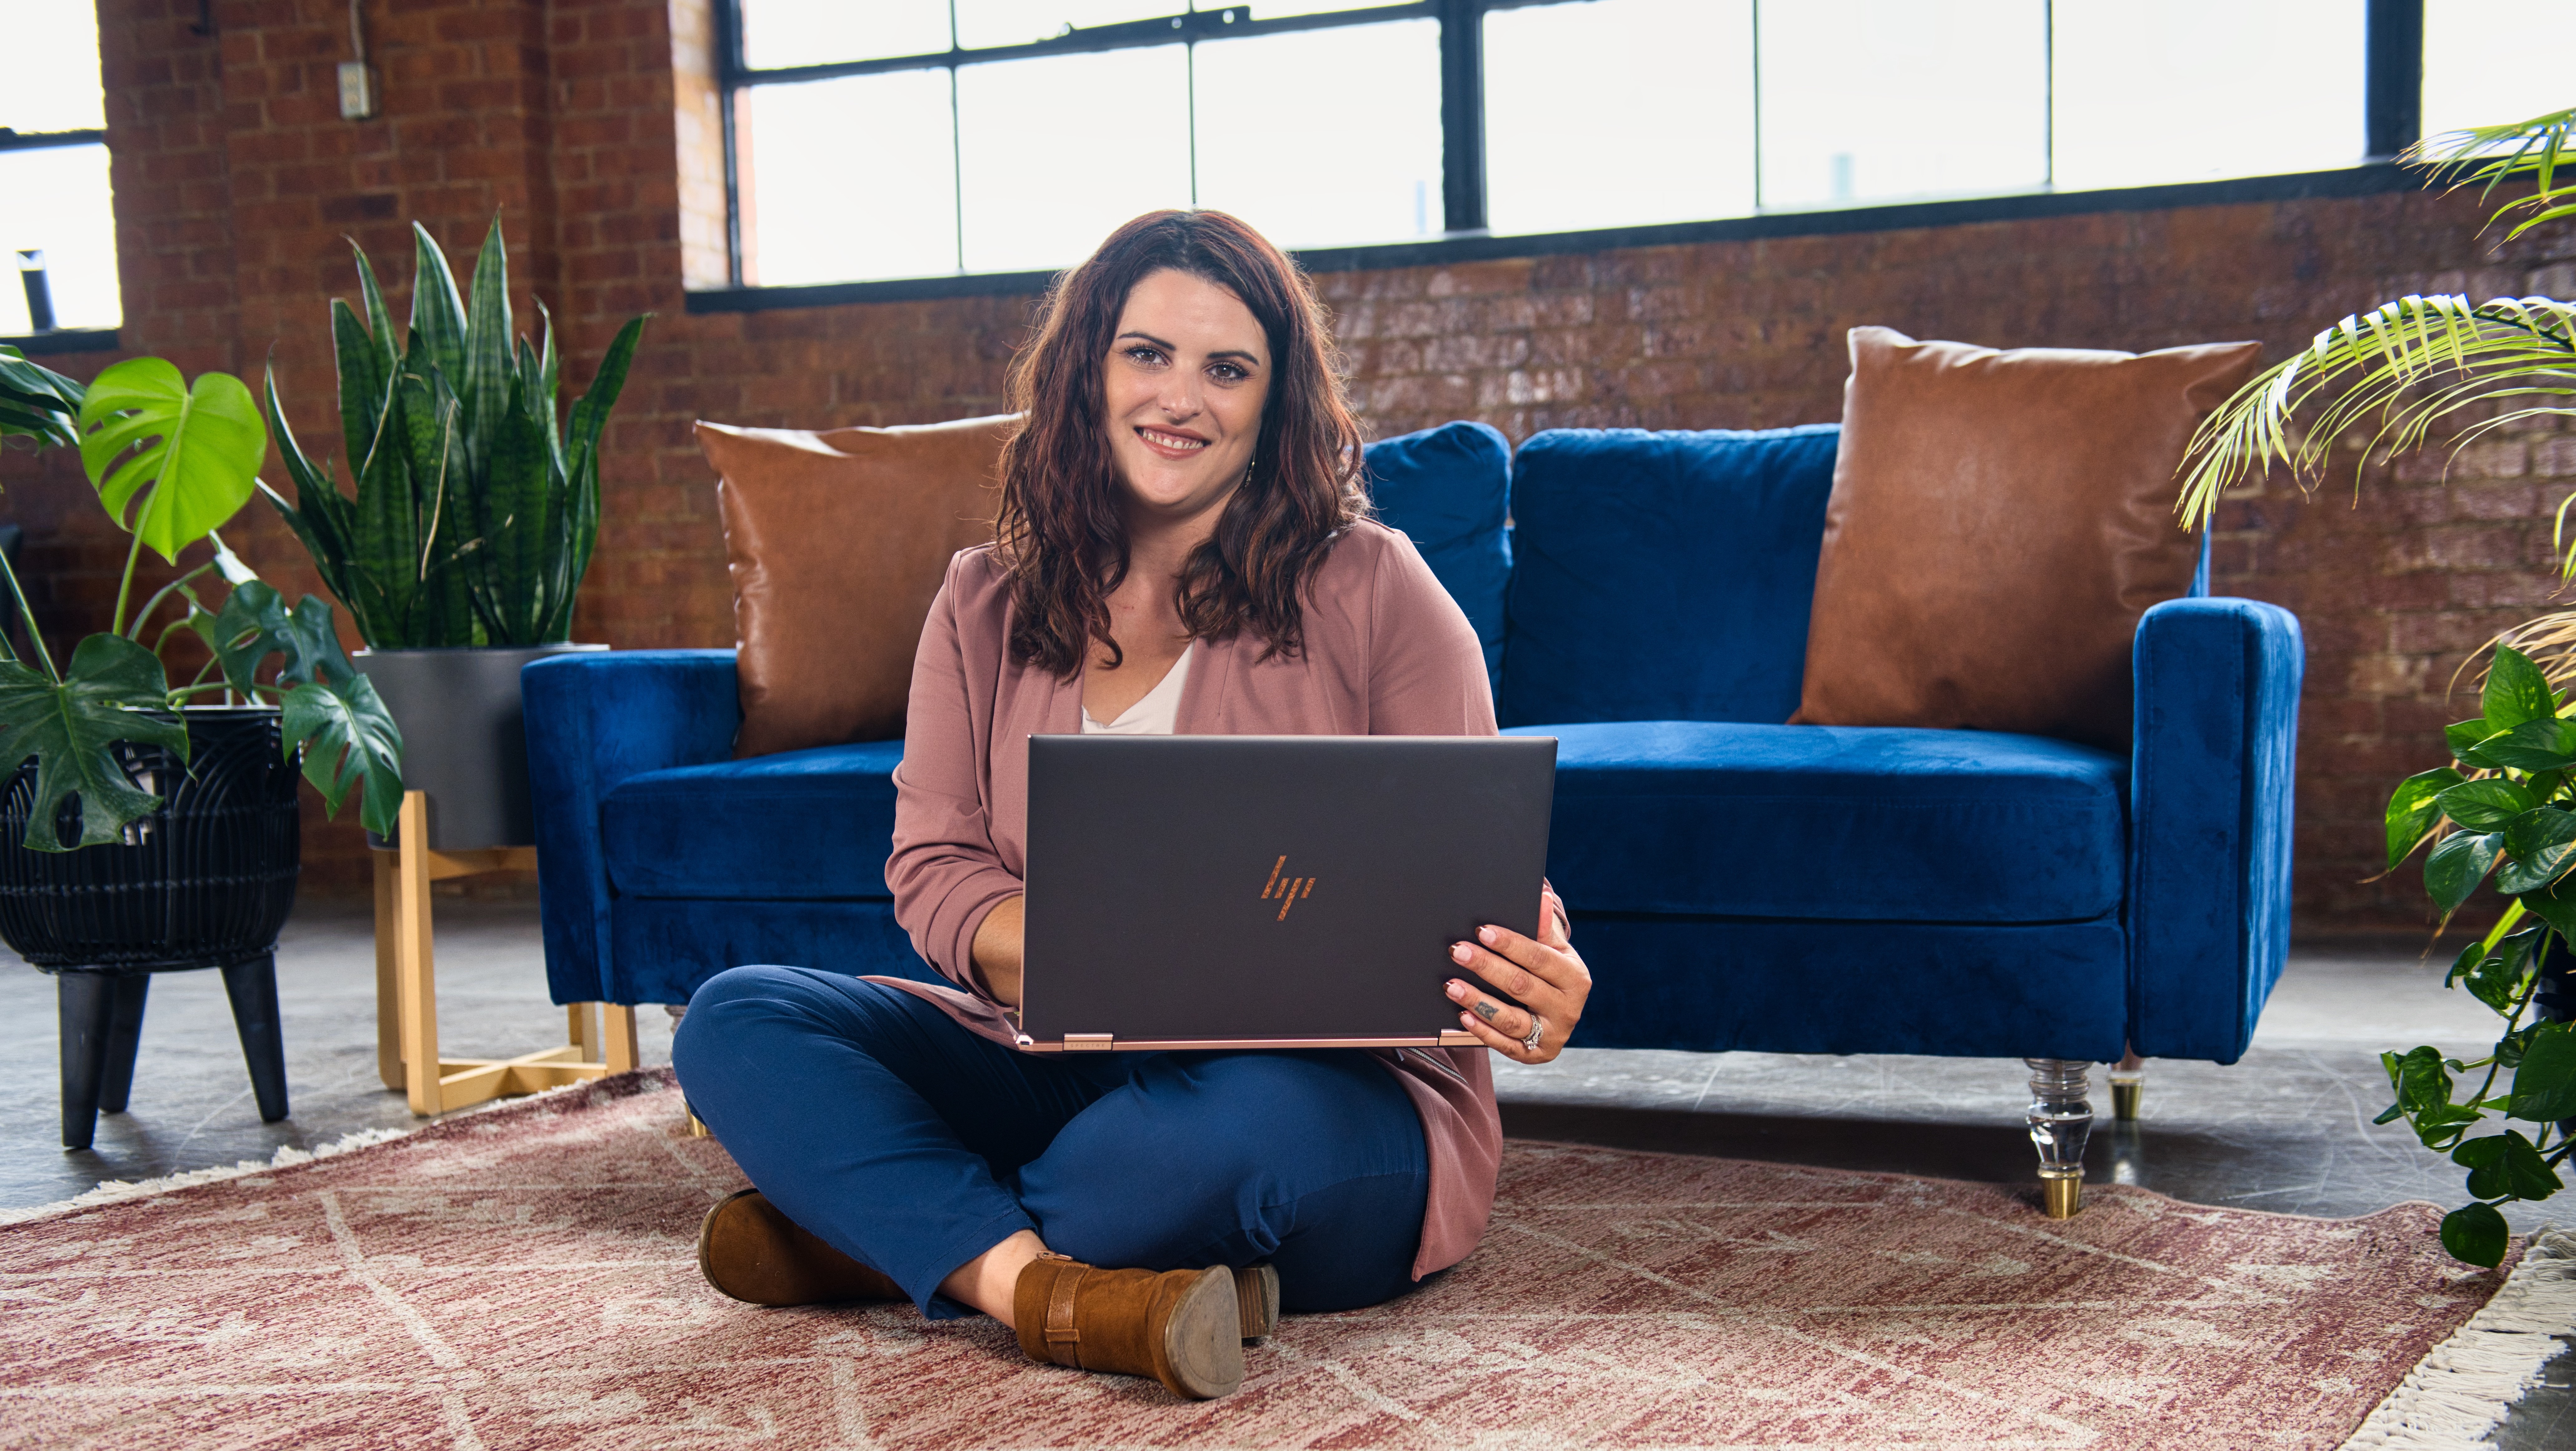 happy-woman-sitting-on-floor-on-laptop-smiling-at-camera